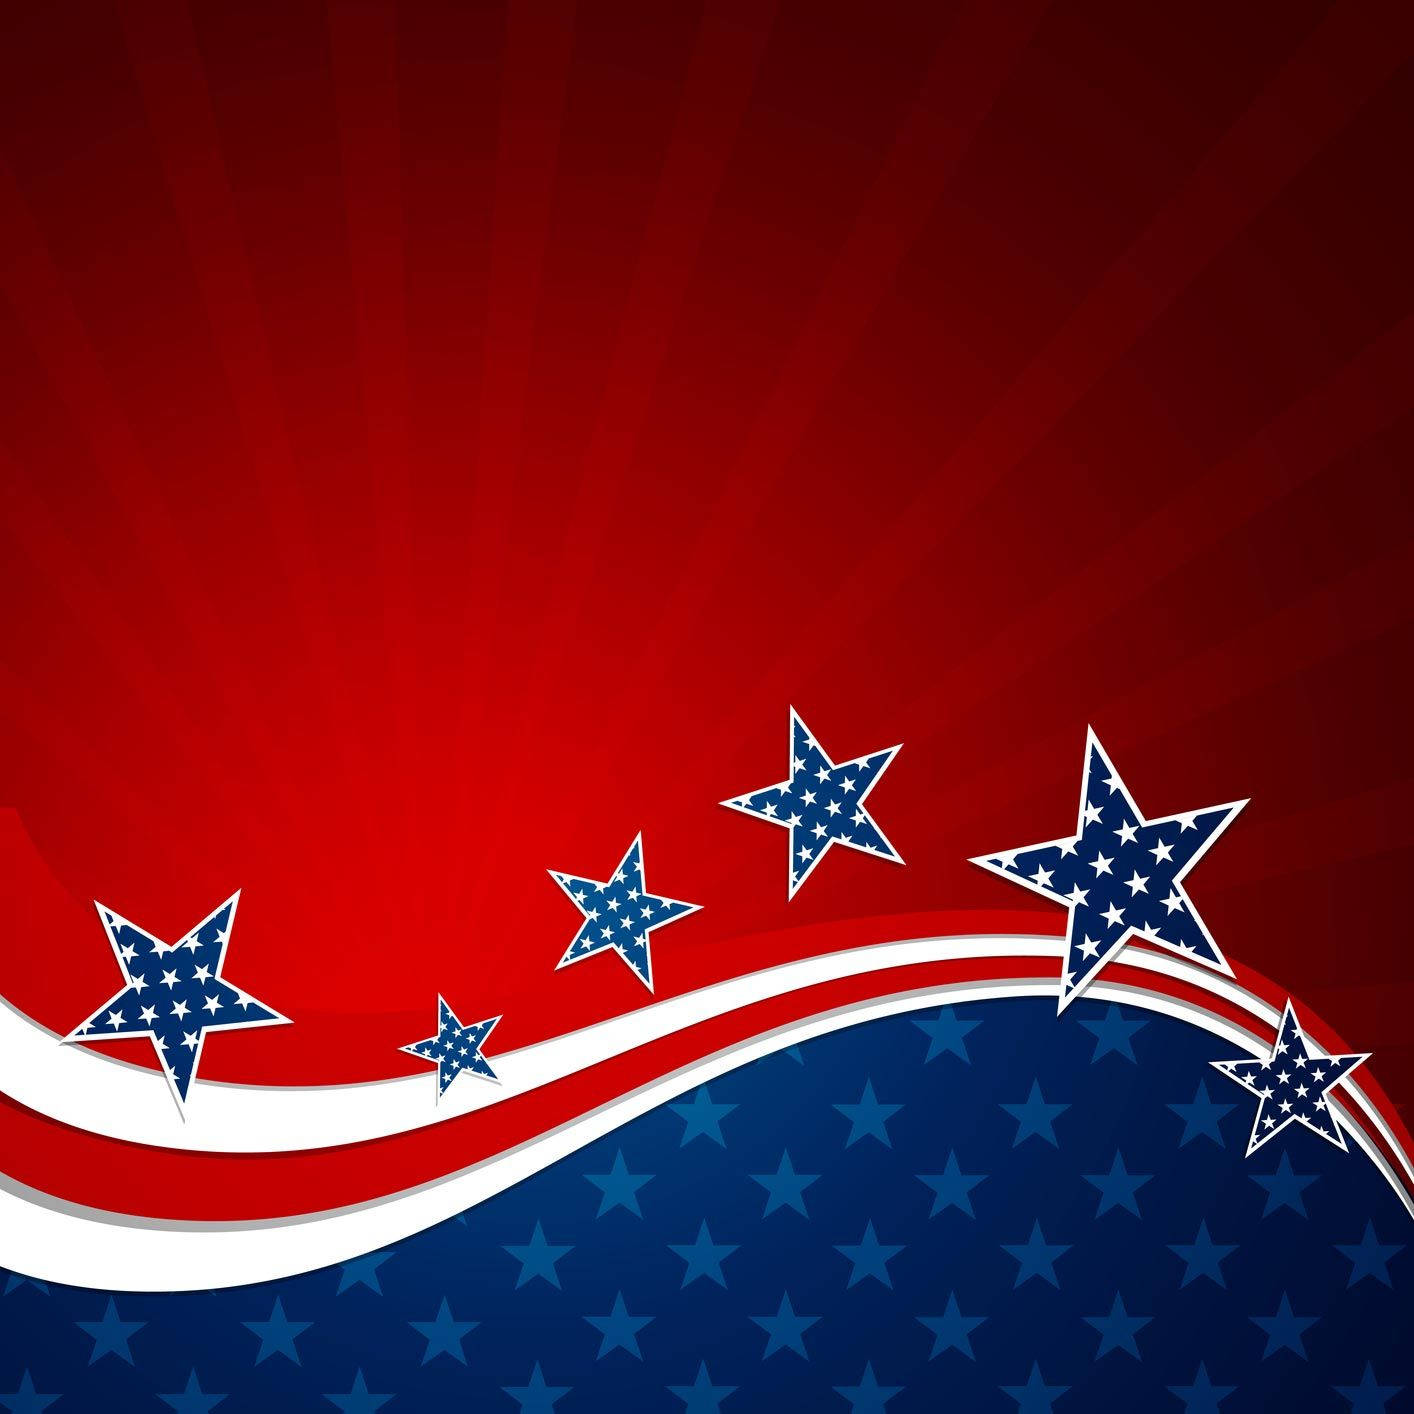 Patriotic Background With Stars And Stripes Background